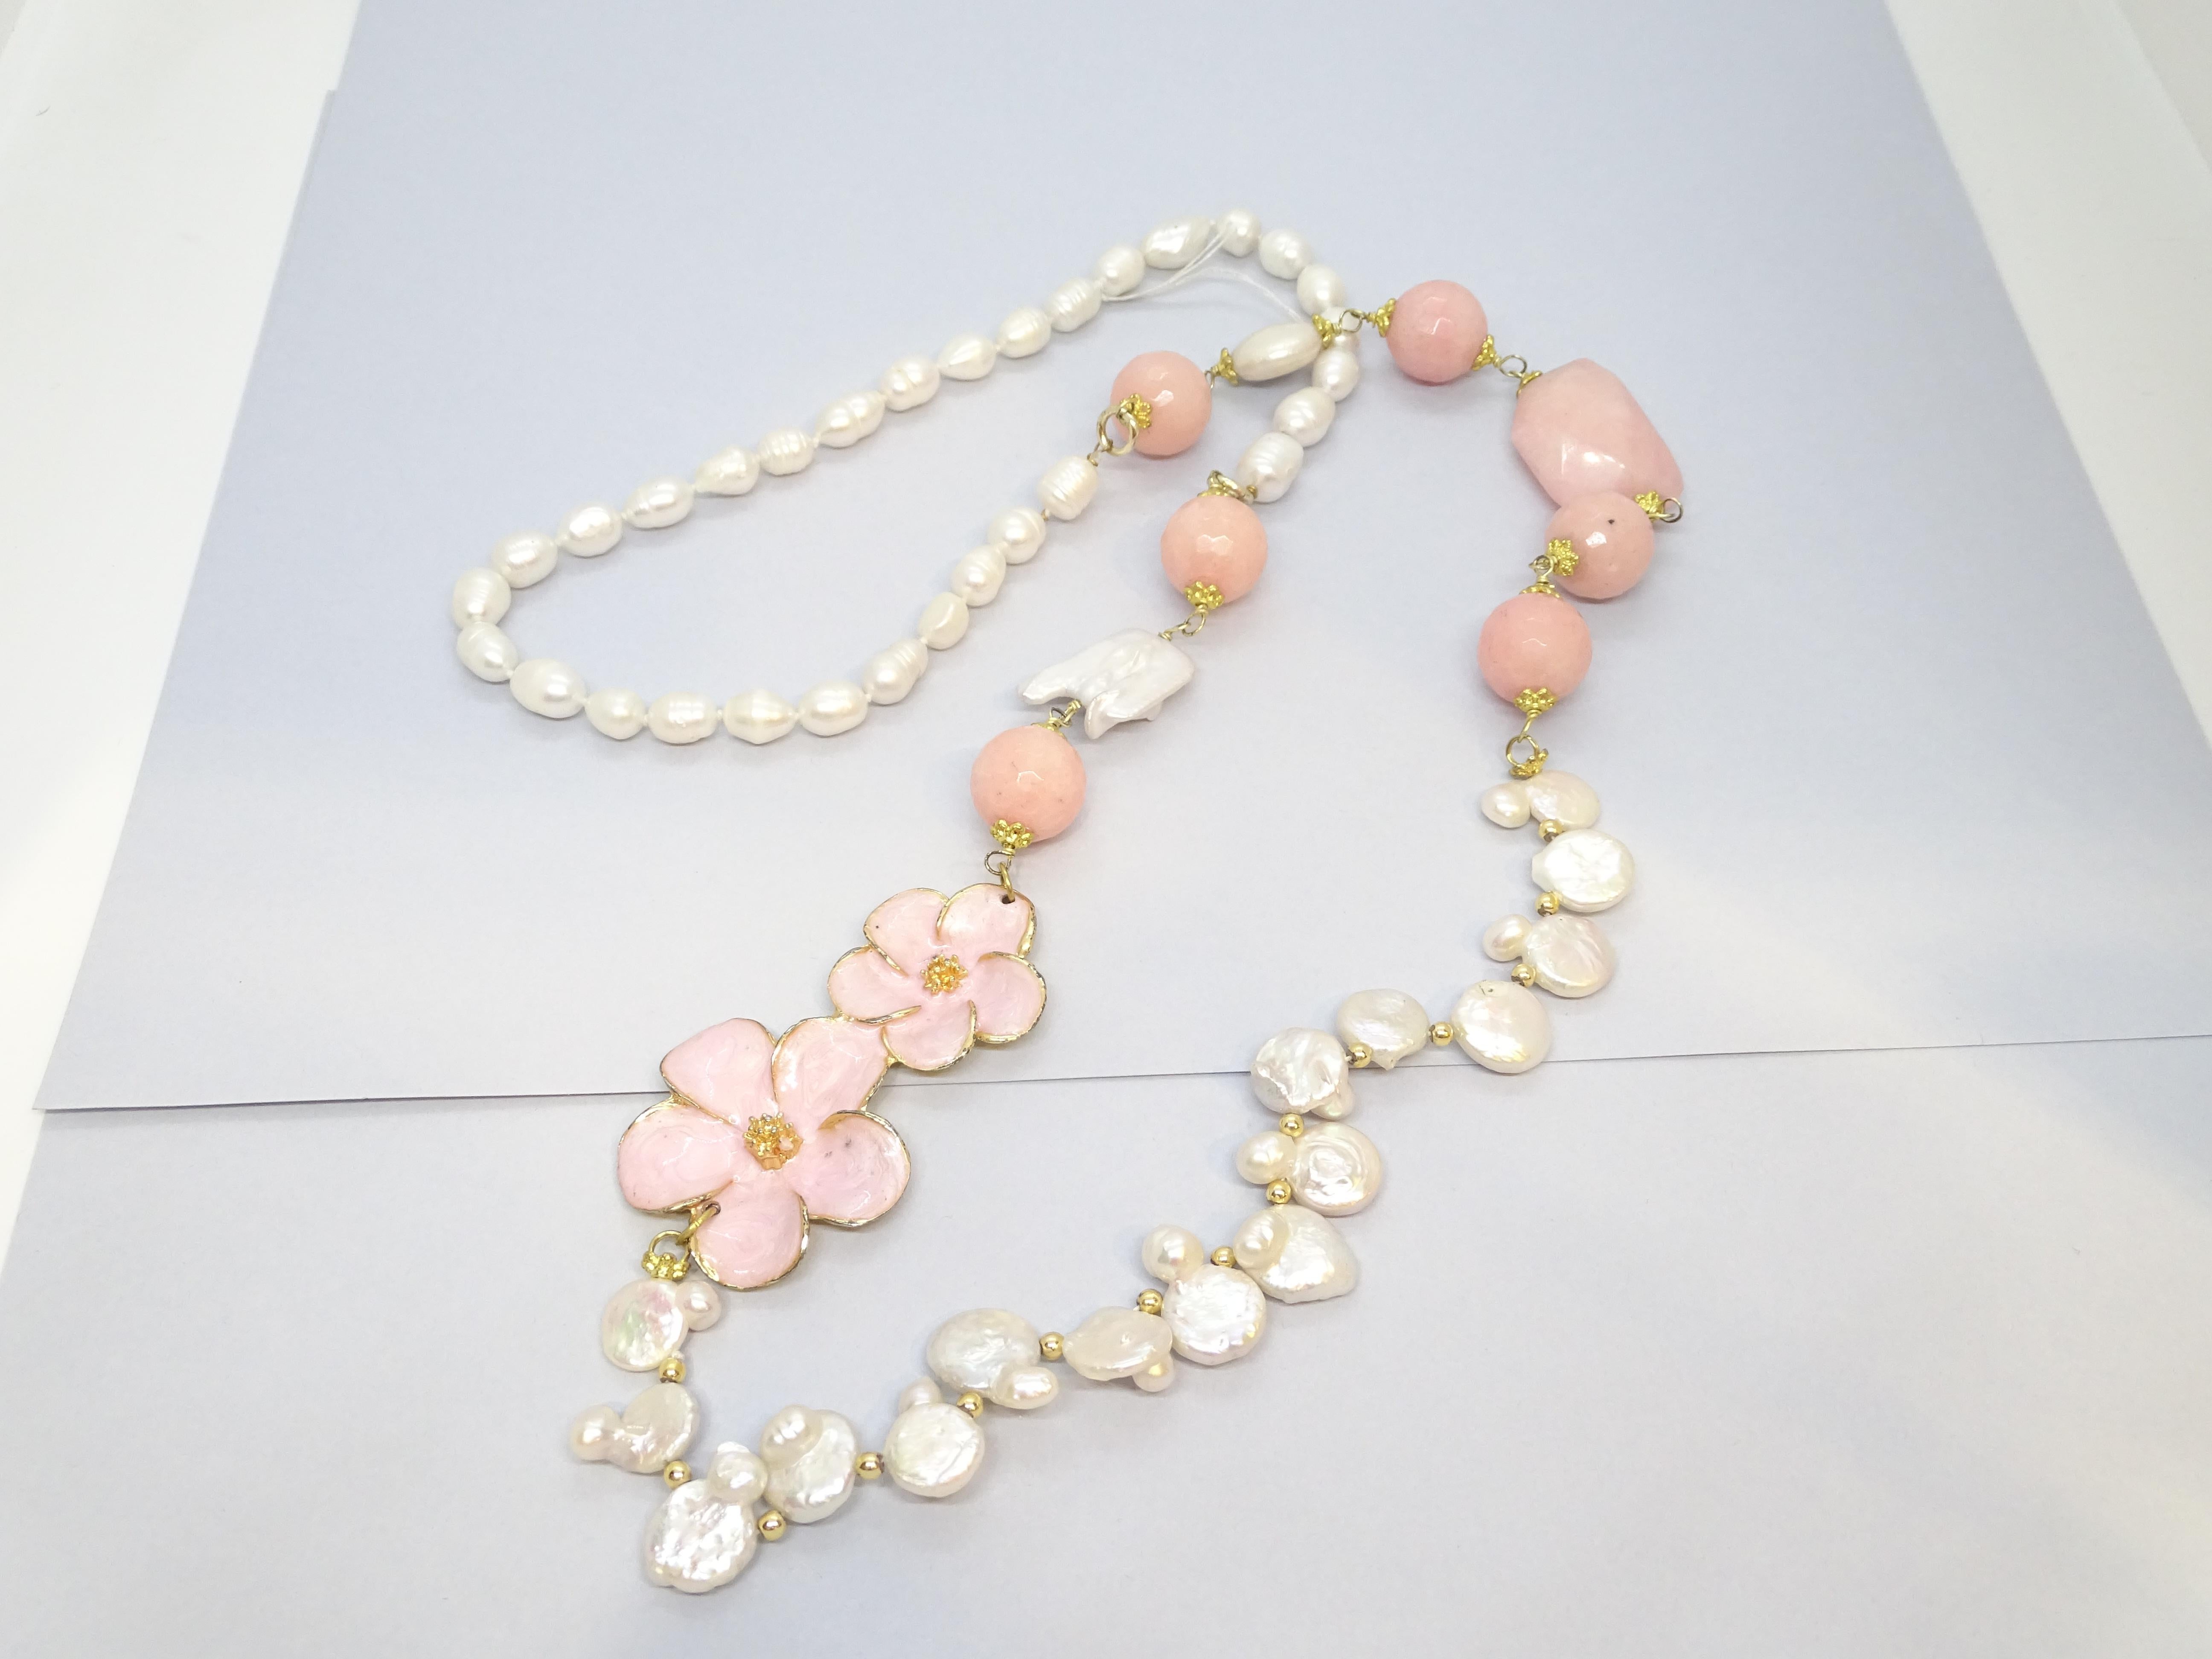 Women's or Men's Italian necklace with baroque pearls, rose quartz and enamel For Sale